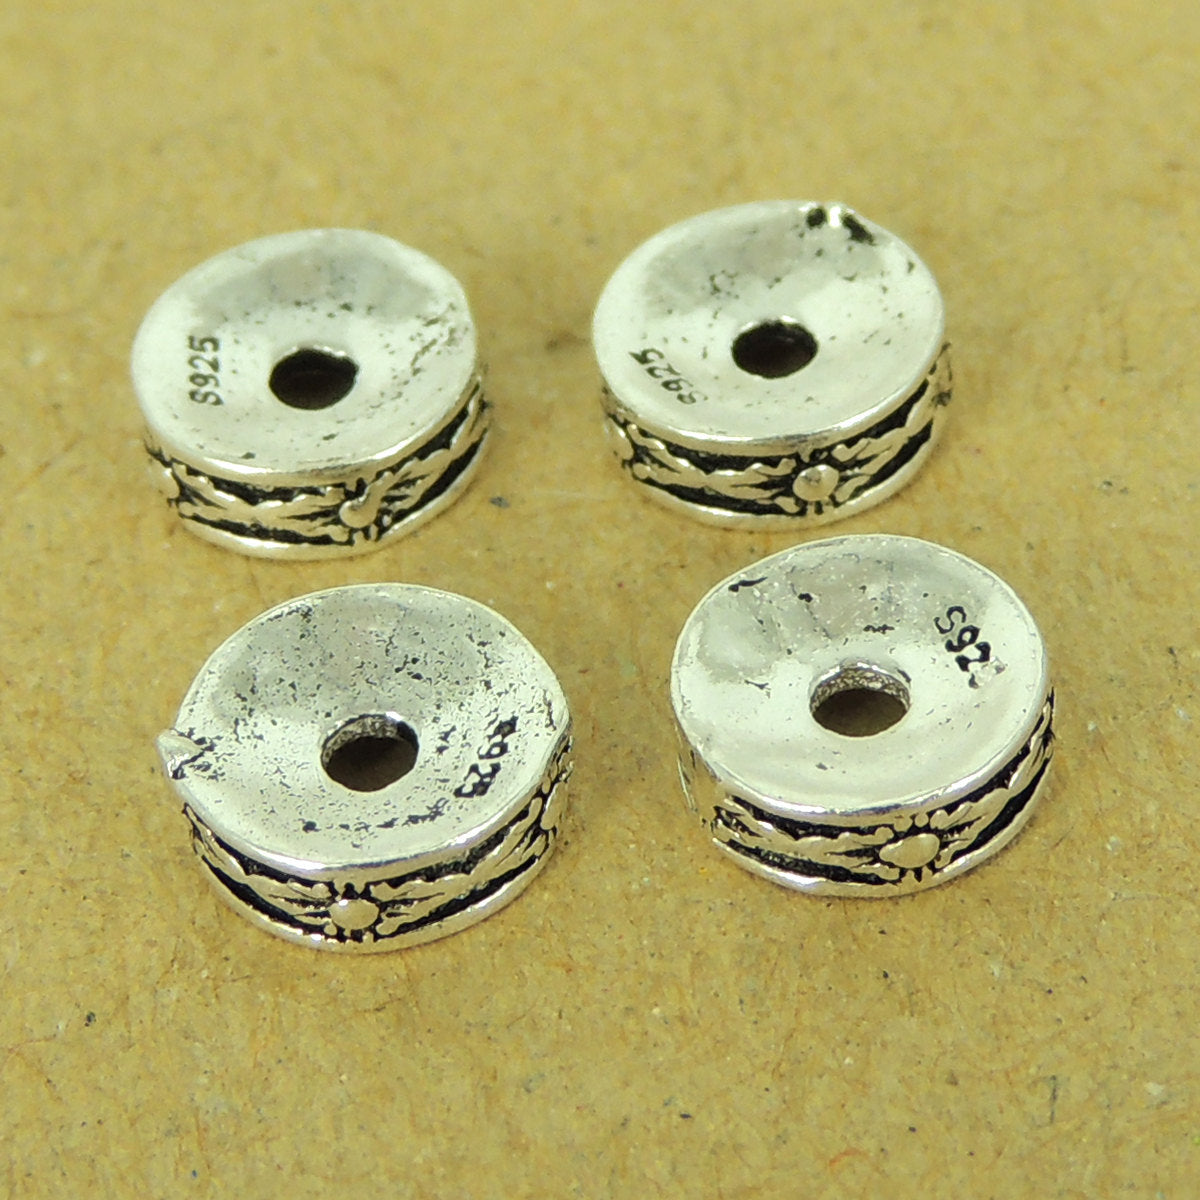 4 PCS Vintage Artisan Spacers - S925 Sterling Silver - Wholesale by Gem & Silver WSP461X4